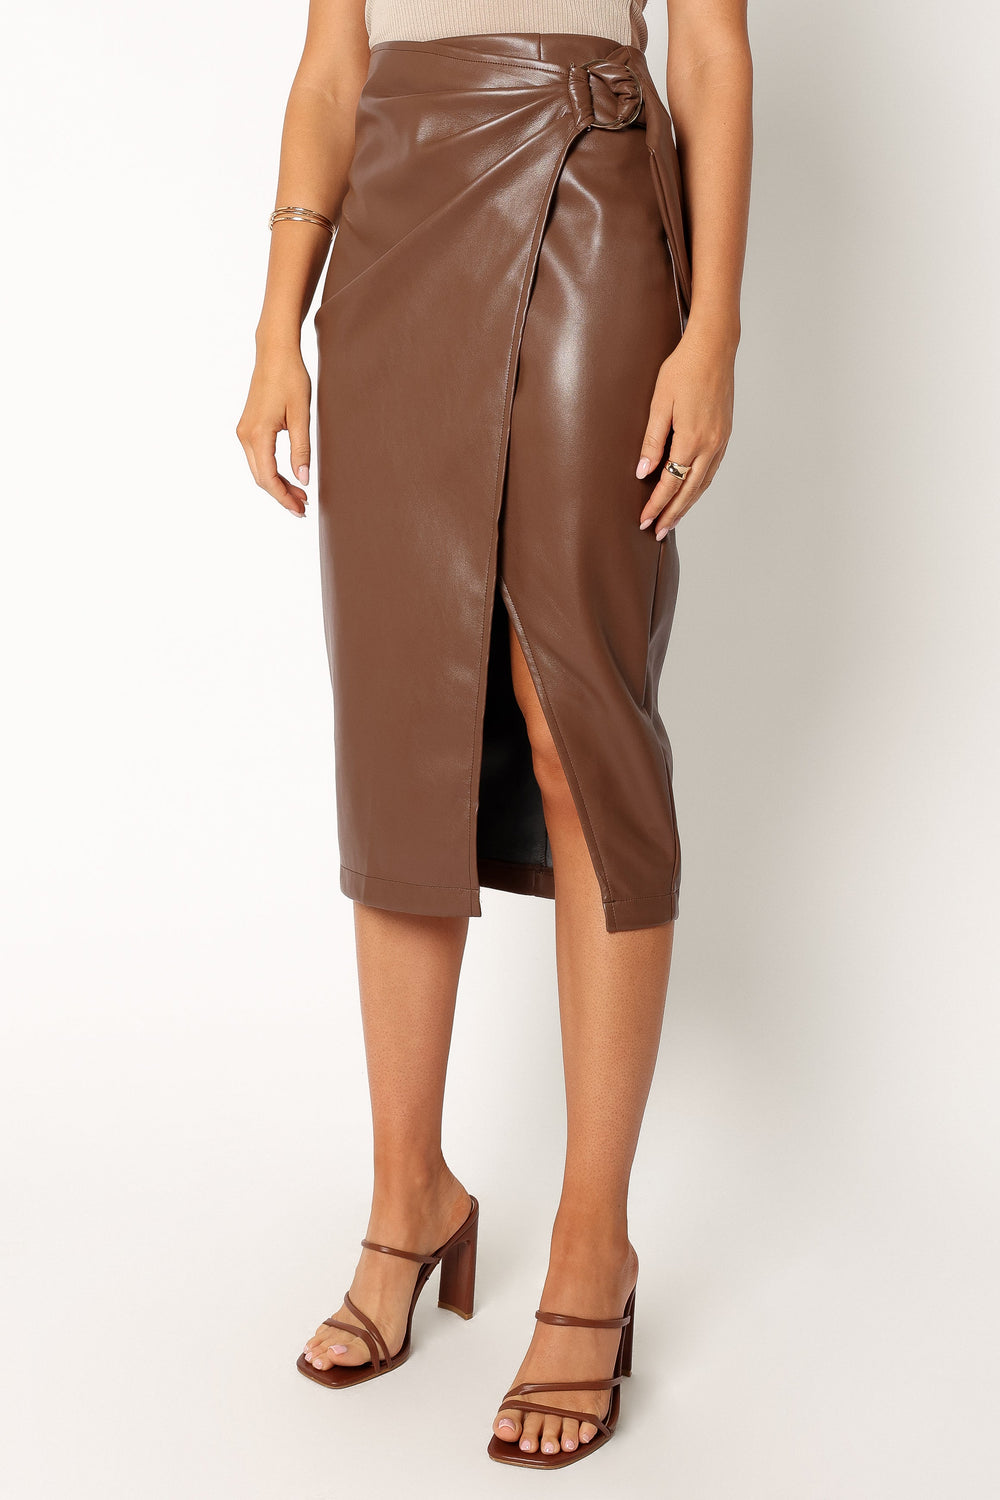 Petal and Pup USA BOTTOMS Landry Faux Leather Skirt - Brown